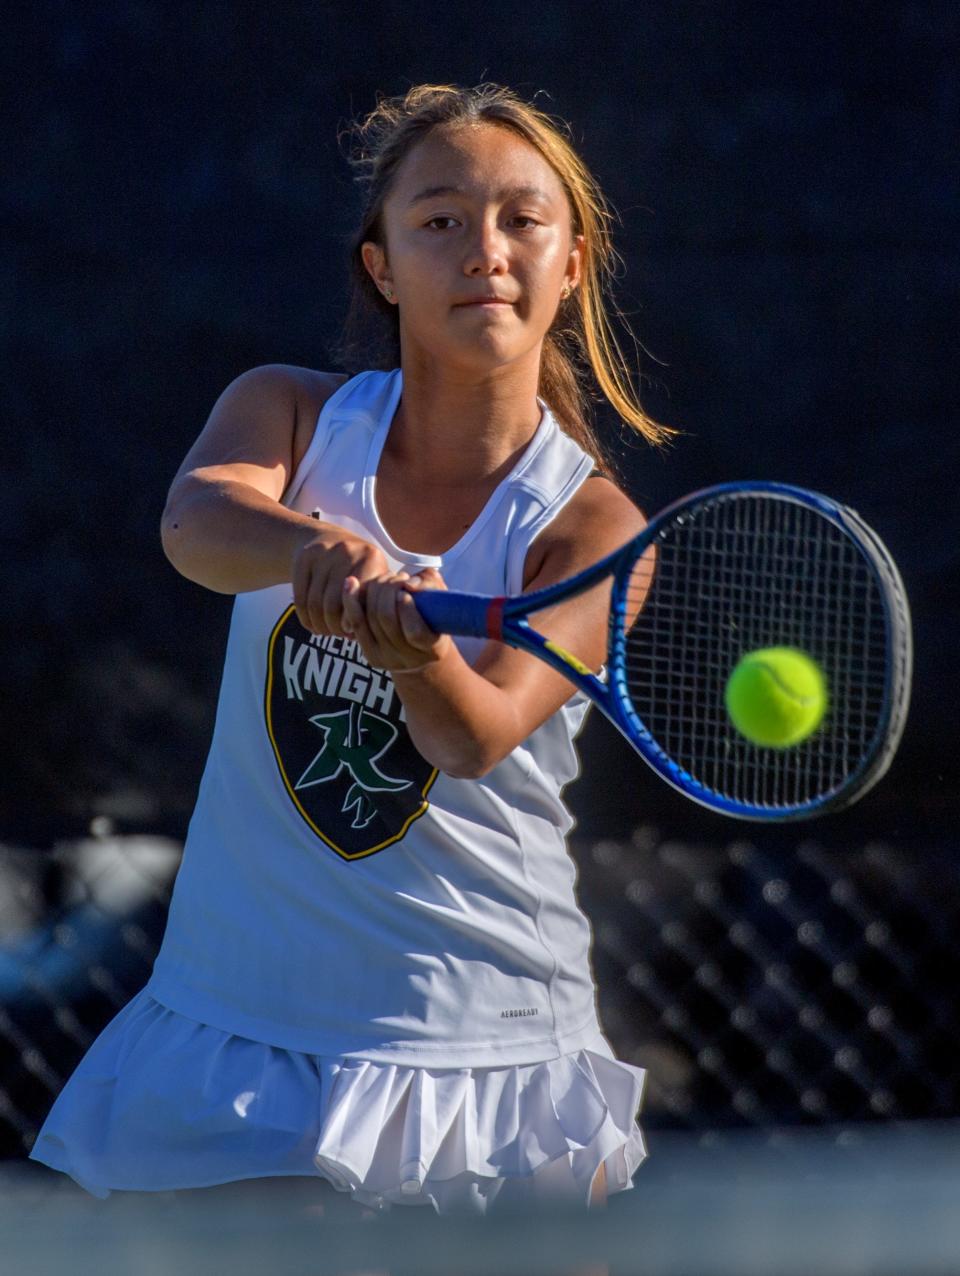 Richwoods sophomore Theresa Bartelme battles Bloomington High School in a singles tennis match Sept. 29, 2022 on the Richwoods tennis courts.